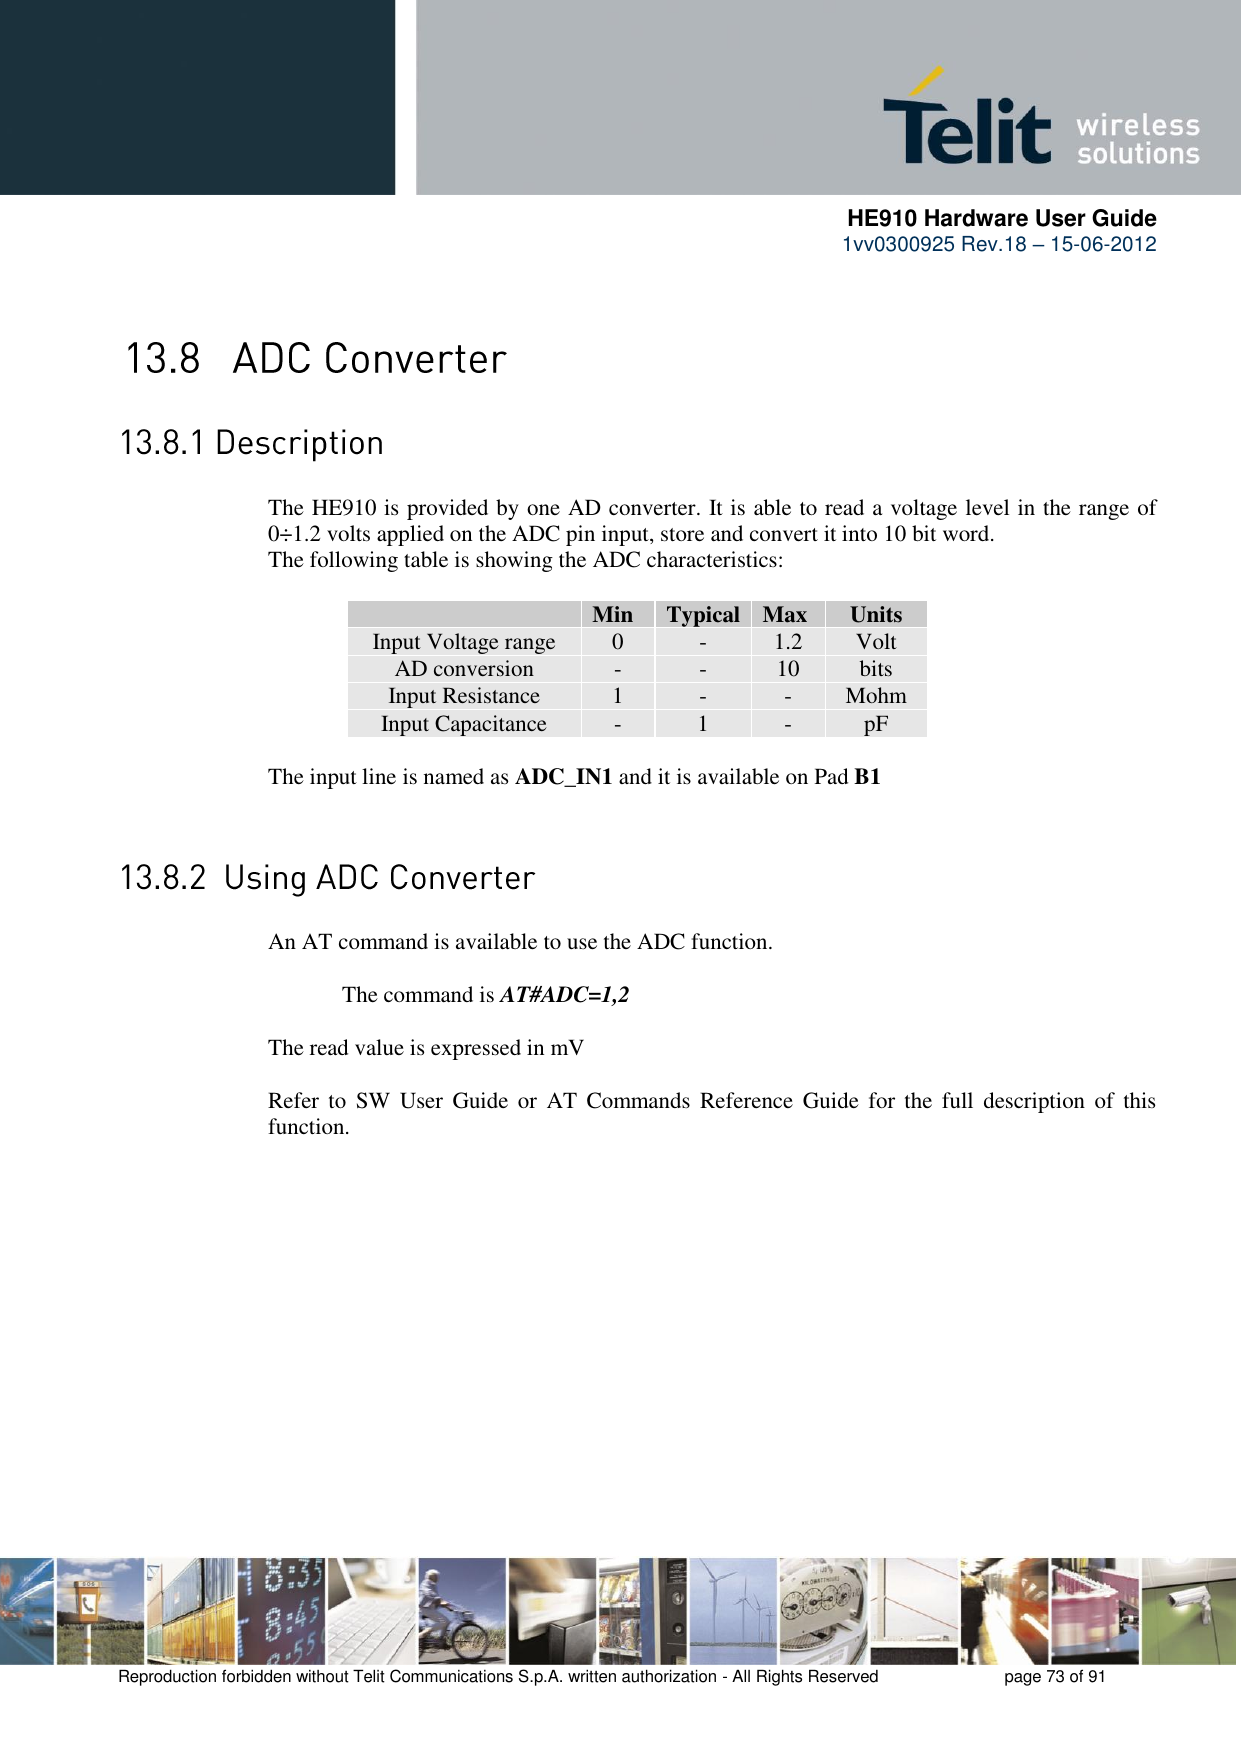      HE910 Hardware User Guide 1vv0300925 Rev.18 – 15-06-2012    Reproduction forbidden without Telit Communications S.p.A. written authorization - All Rights Reserved    page 73 of 91    The HE910 is provided by one AD converter. It is able to read a voltage level in the range of 0÷1.2 volts applied on the ADC pin input, store and convert it into 10 bit word.  The following table is showing the ADC characteristics:   Min Typical Max Units Input Voltage range 0 - 1.2 Volt AD conversion - - 10 bits Input Resistance 1 - - Mohm Input Capacitance  - 1 - pF  The input line is named as ADC_IN1 and it is available on Pad B1    An AT command is available to use the ADC function.  The command is AT#ADC=1,2  The read value is expressed in mV  Refer  to  SW  User  Guide  or  AT  Commands  Reference  Guide  for  the  full  description of  this function. 